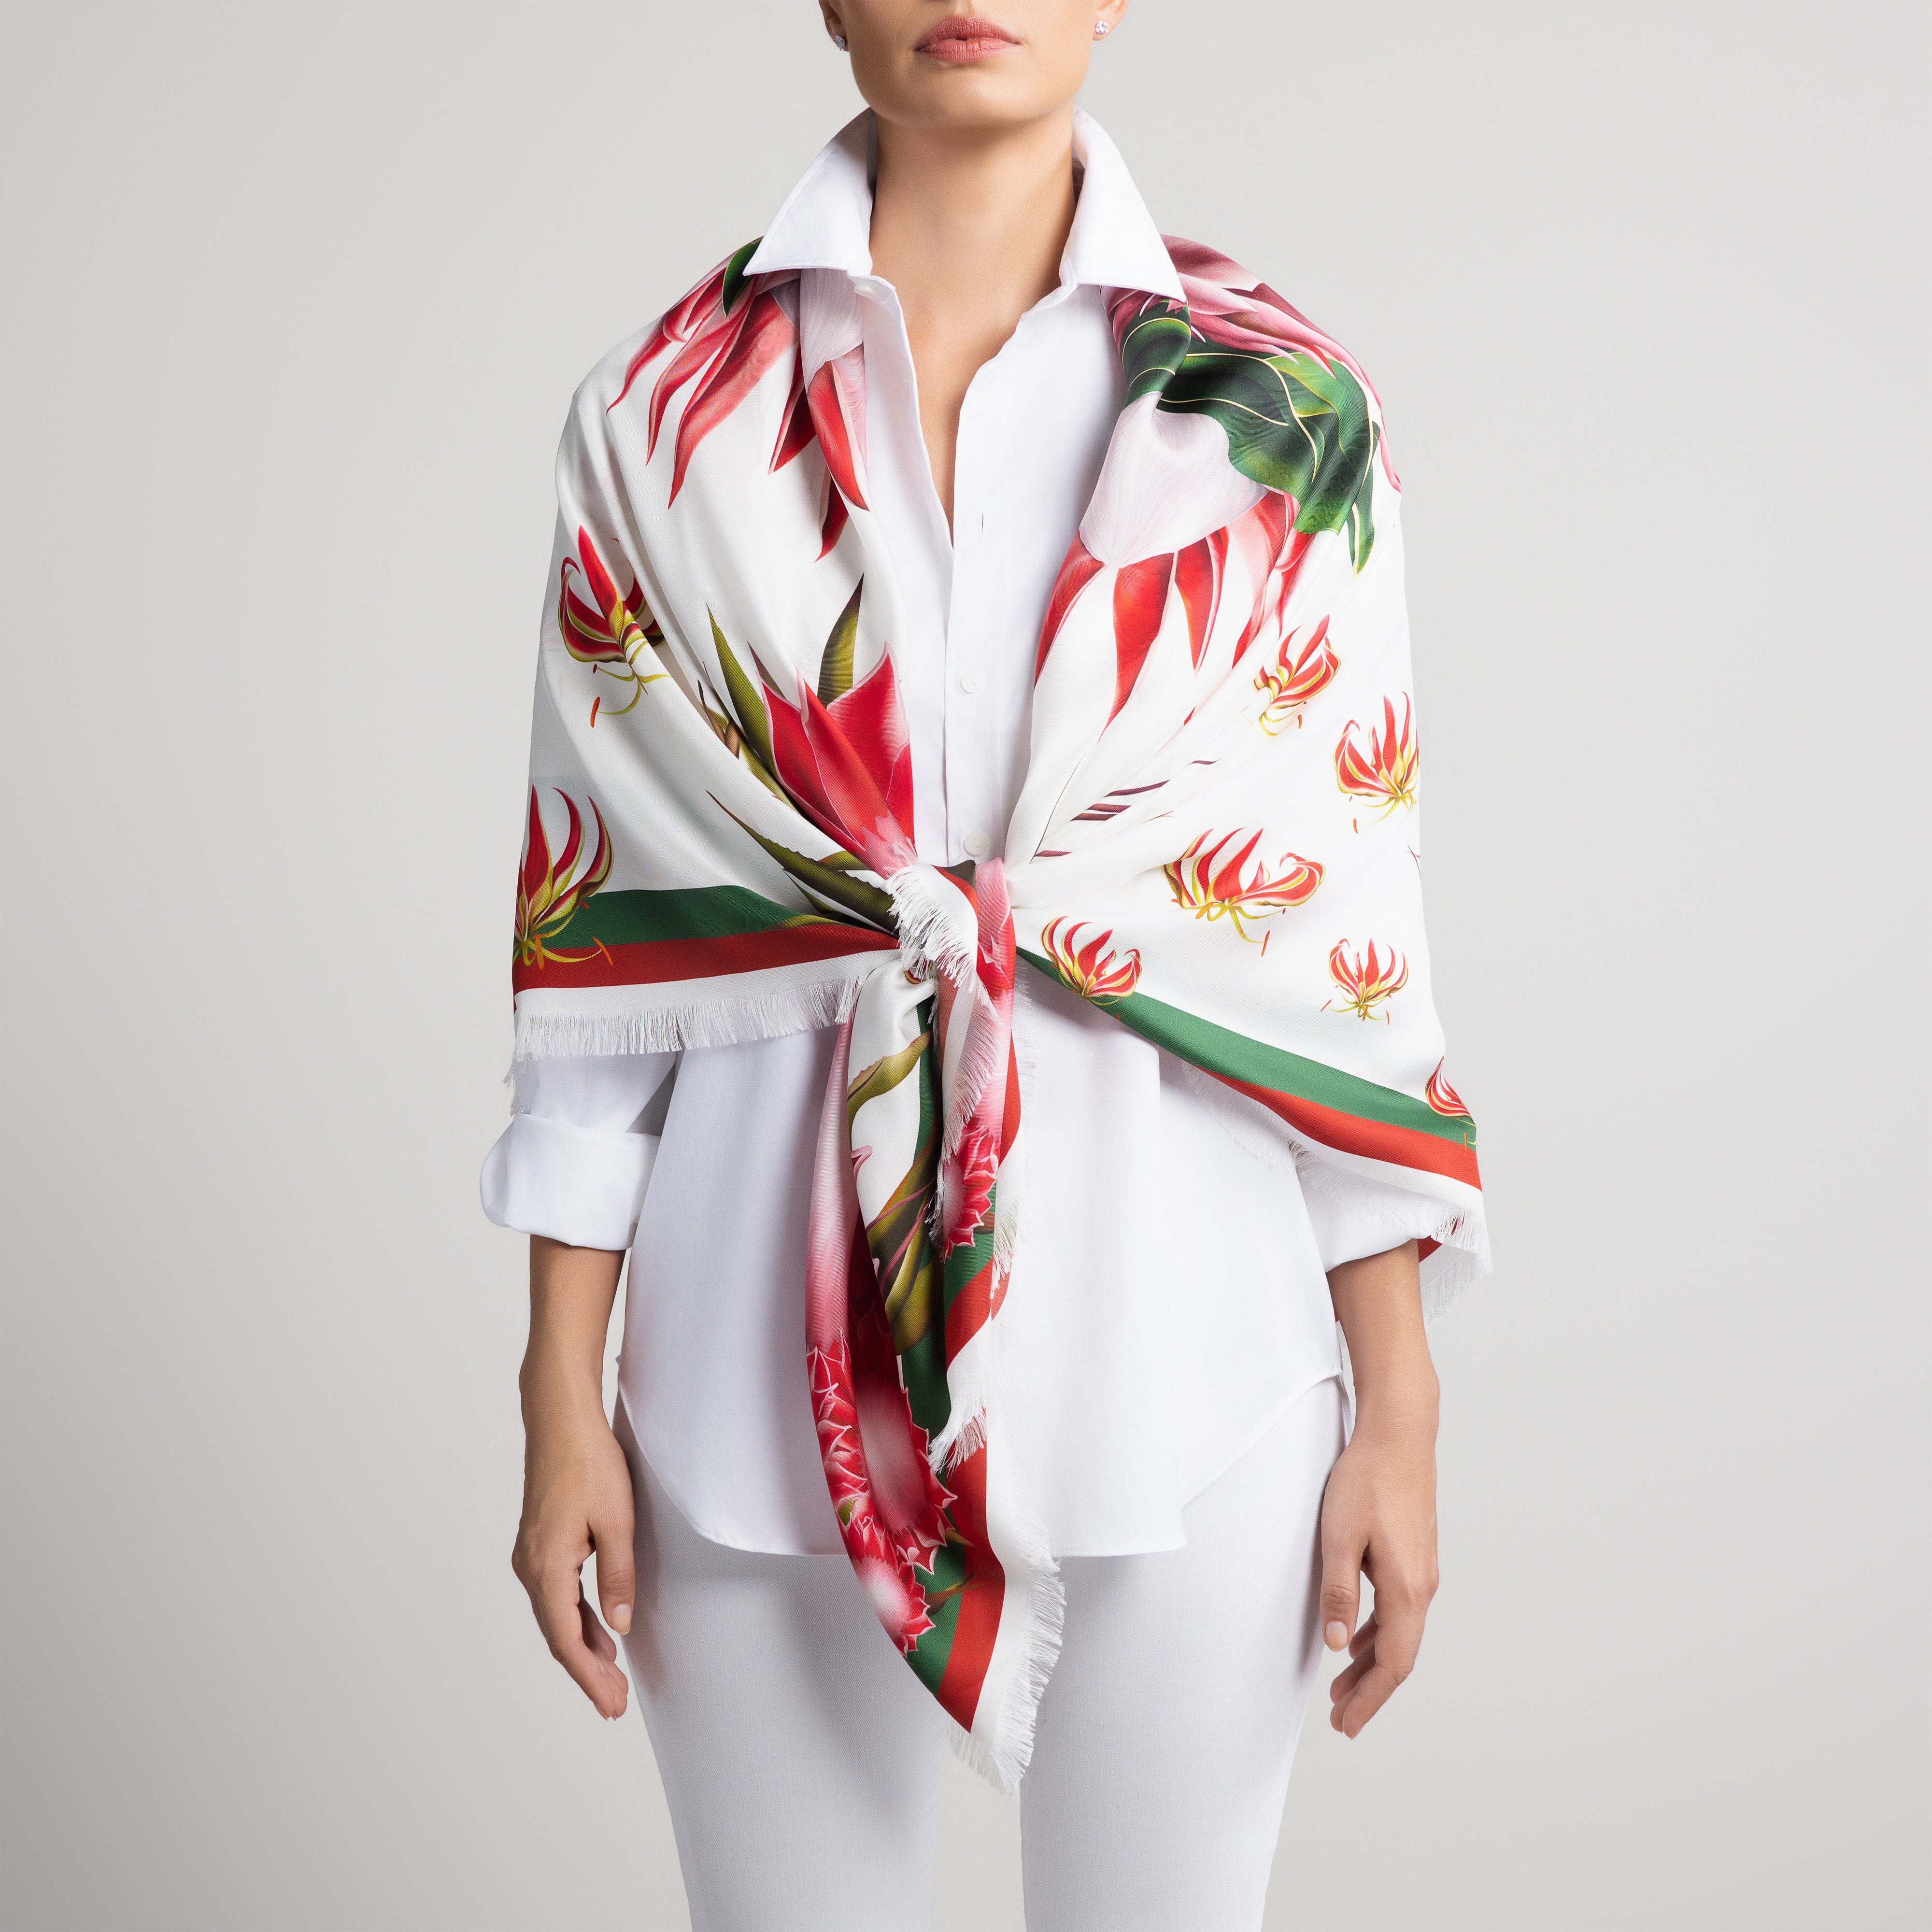 Protea Grande Silk Scarf in White with Hand-Feathered Edges